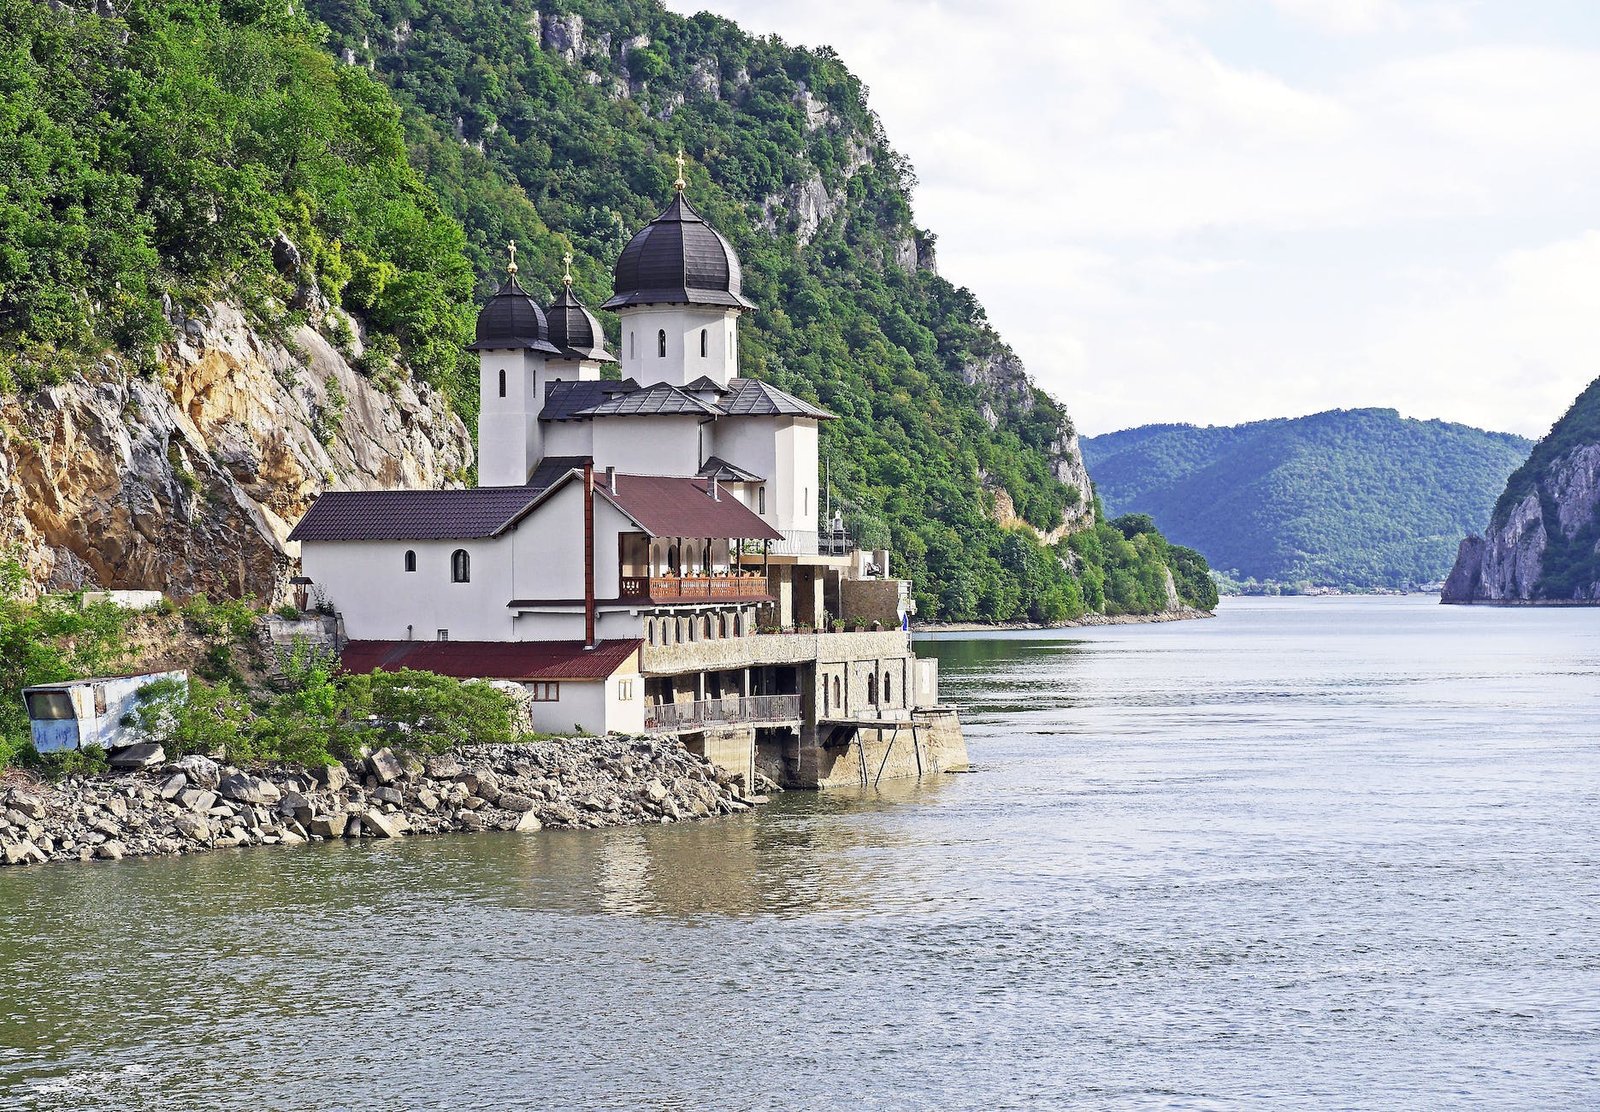 white and black house located at riverside - The Danube River